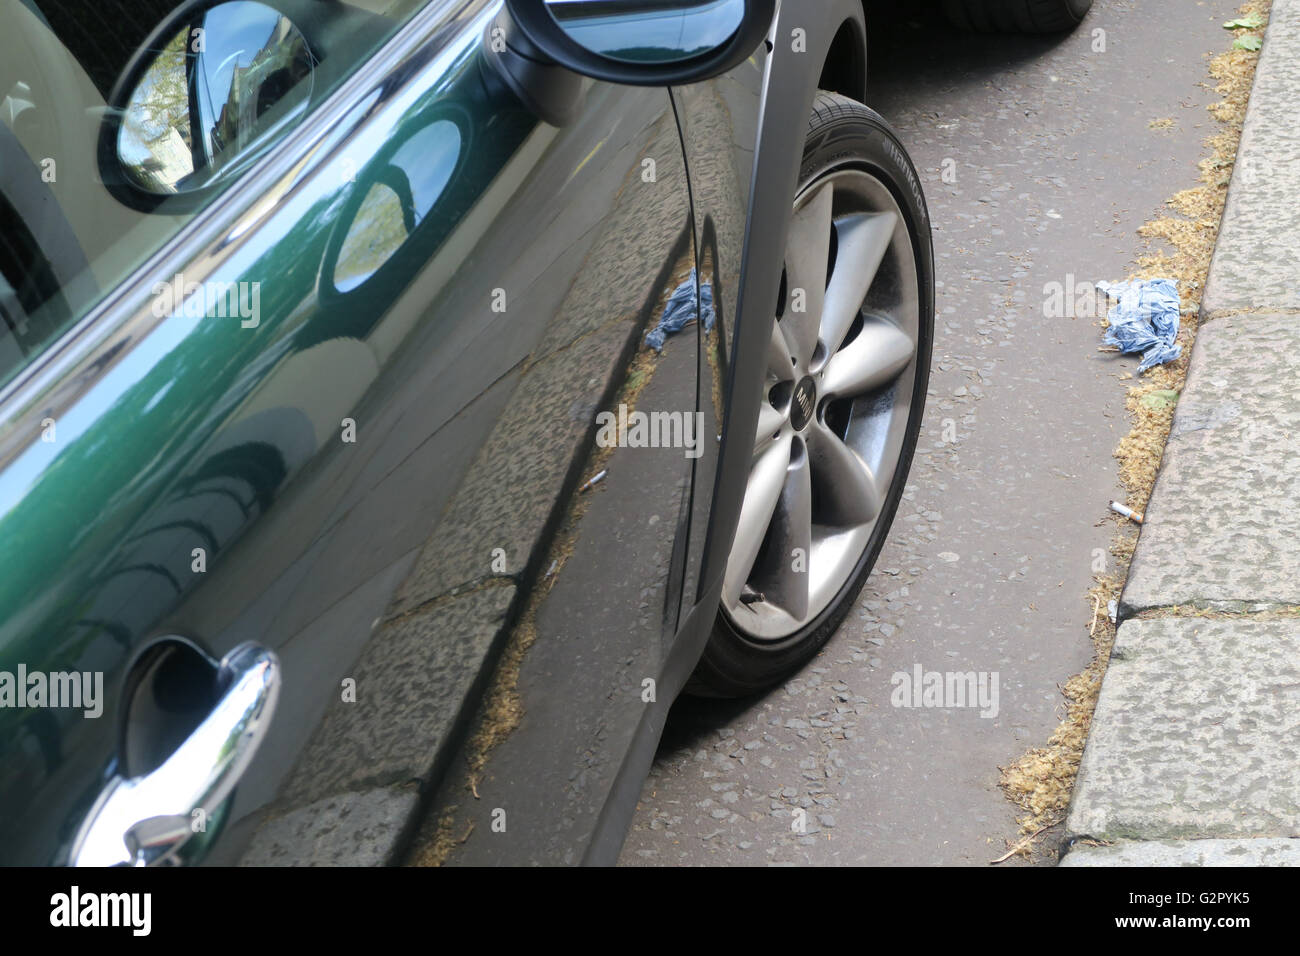 shiny green car with wheel, pavement reflected Stock Photo